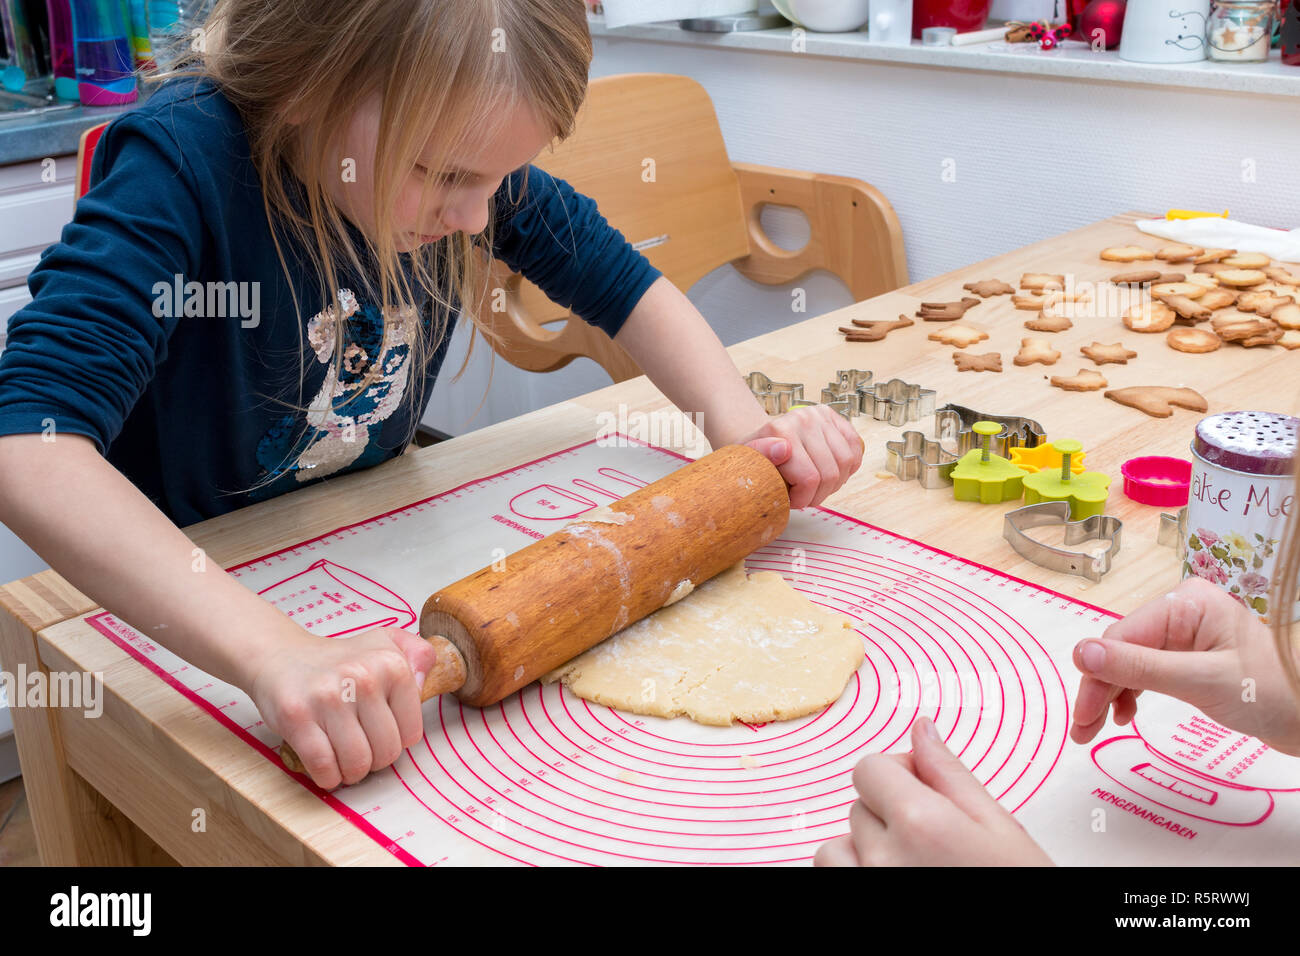 A girl is using the pastry roller to roll out the dough on the table Stock Photo